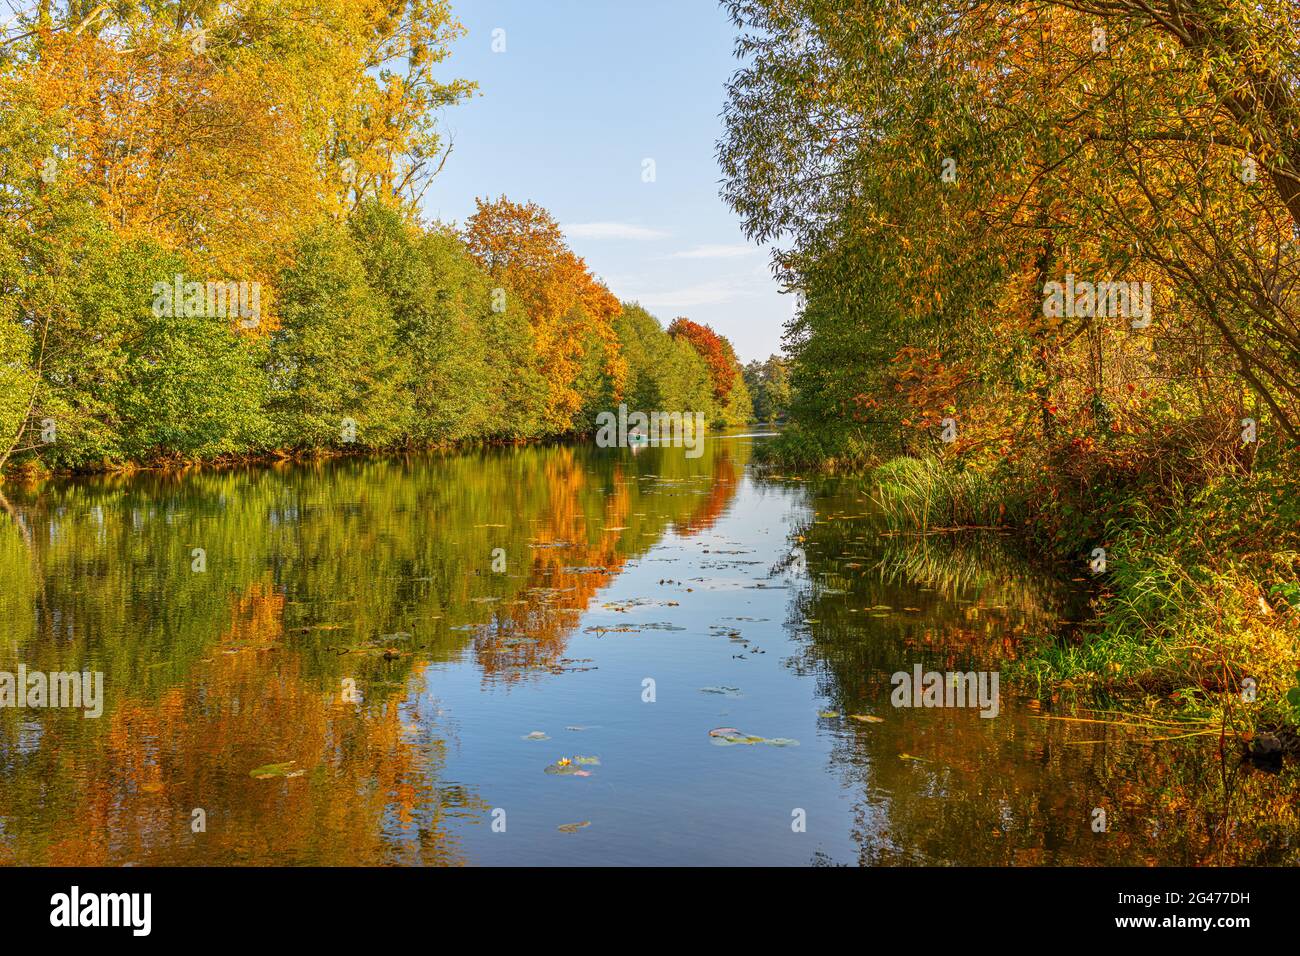 Germany, Brandenburg, Barnim County, Langer TrÃ¶del canal in fall, holidays in wonderful nature Stock Photo